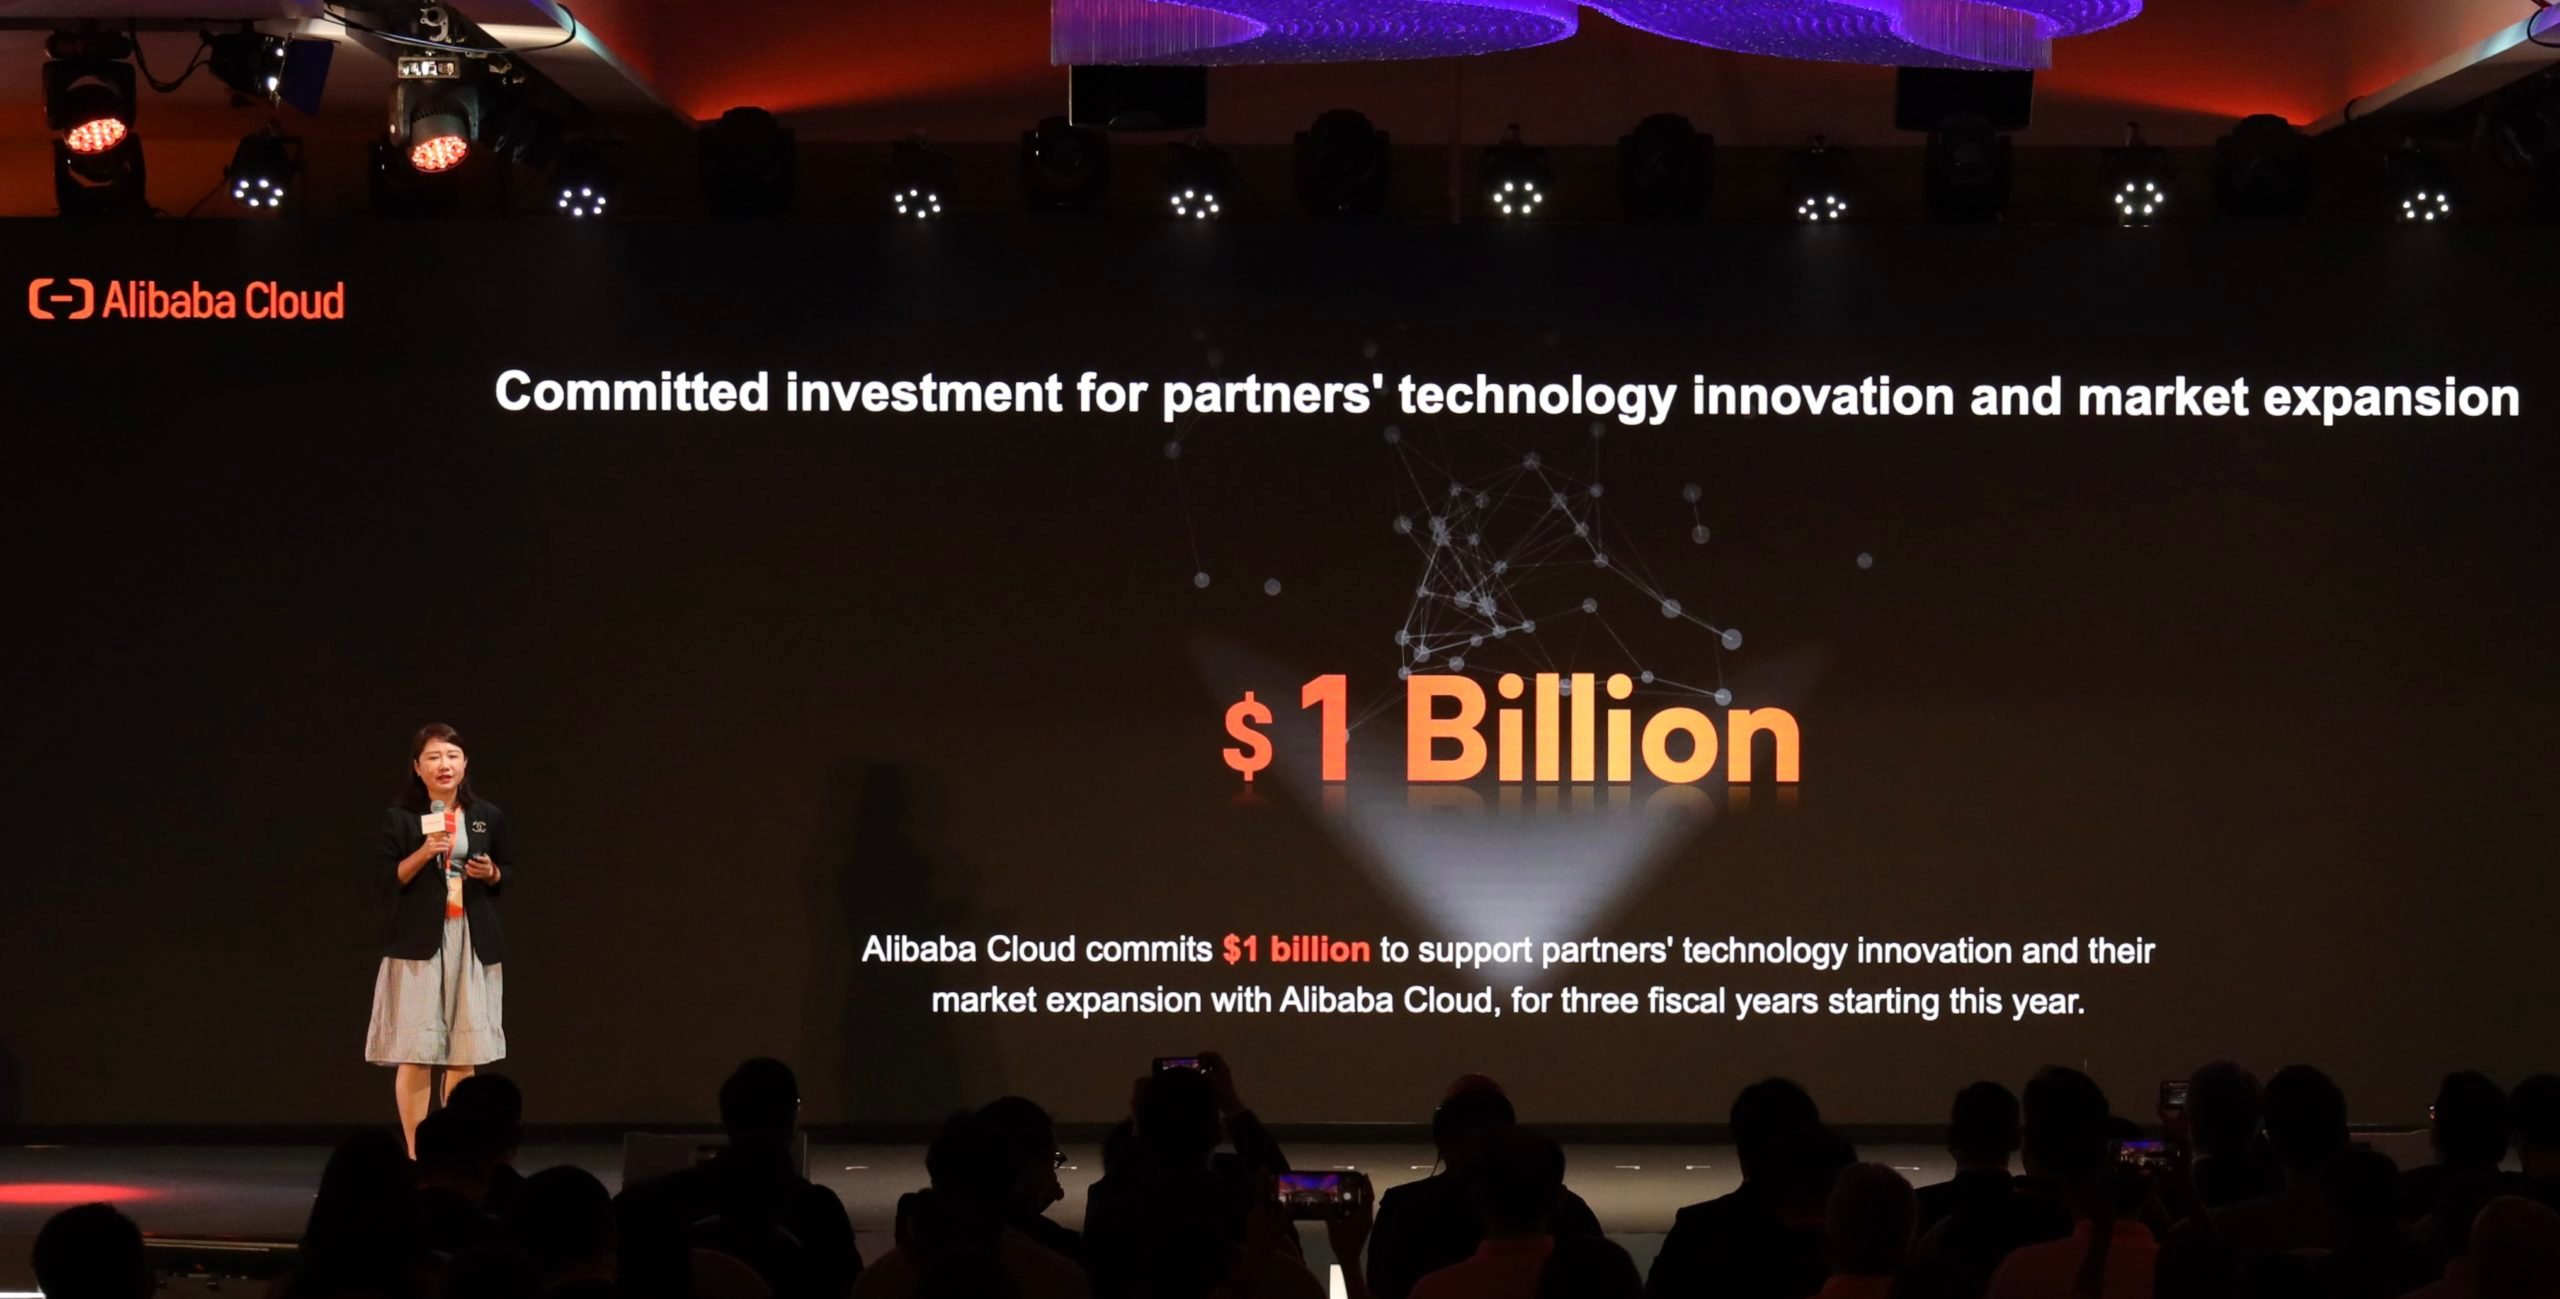 China Digest: Alibaba pledges $1b to support cloud services customers; Lithium battery maker Jiemeng bags $42m